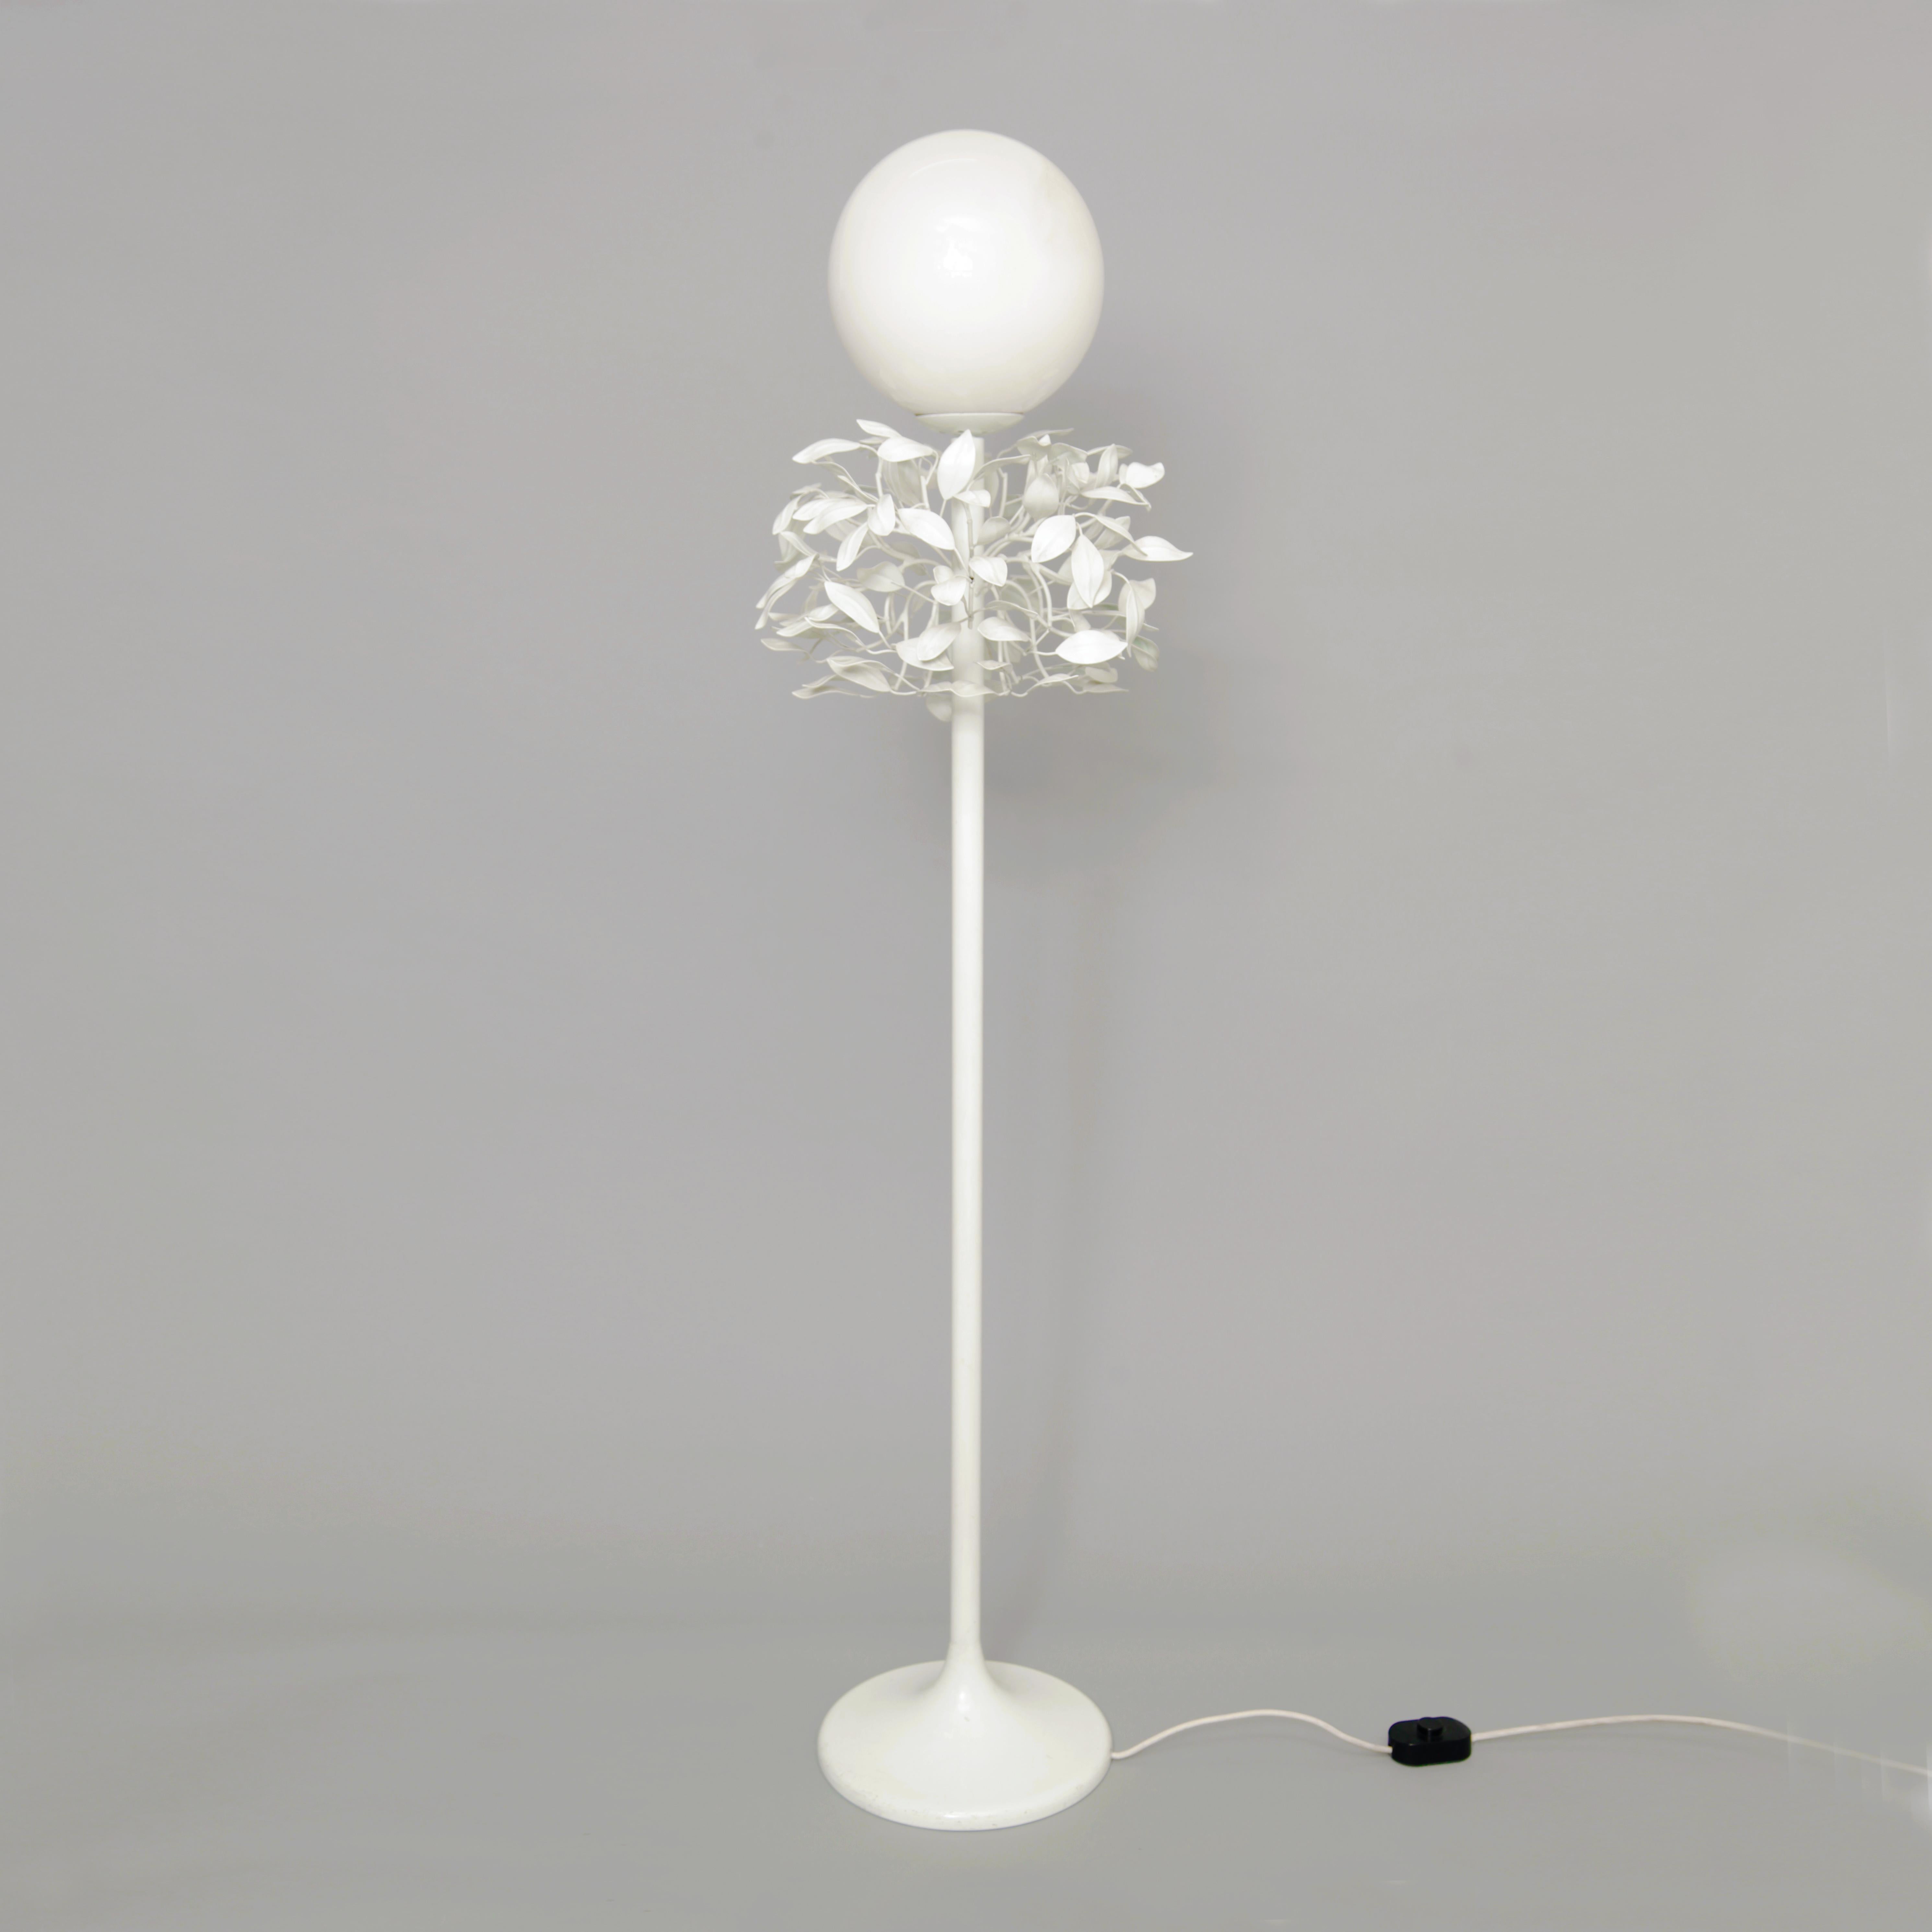 Green-tinted cream enamel floor lamp designed by Sergio Terzani in the shape of a laurel tree branch, with an elegant globular glass shade. Excellent quality and in great condition, with some wear consistent with age.

CREATOR: Sergio